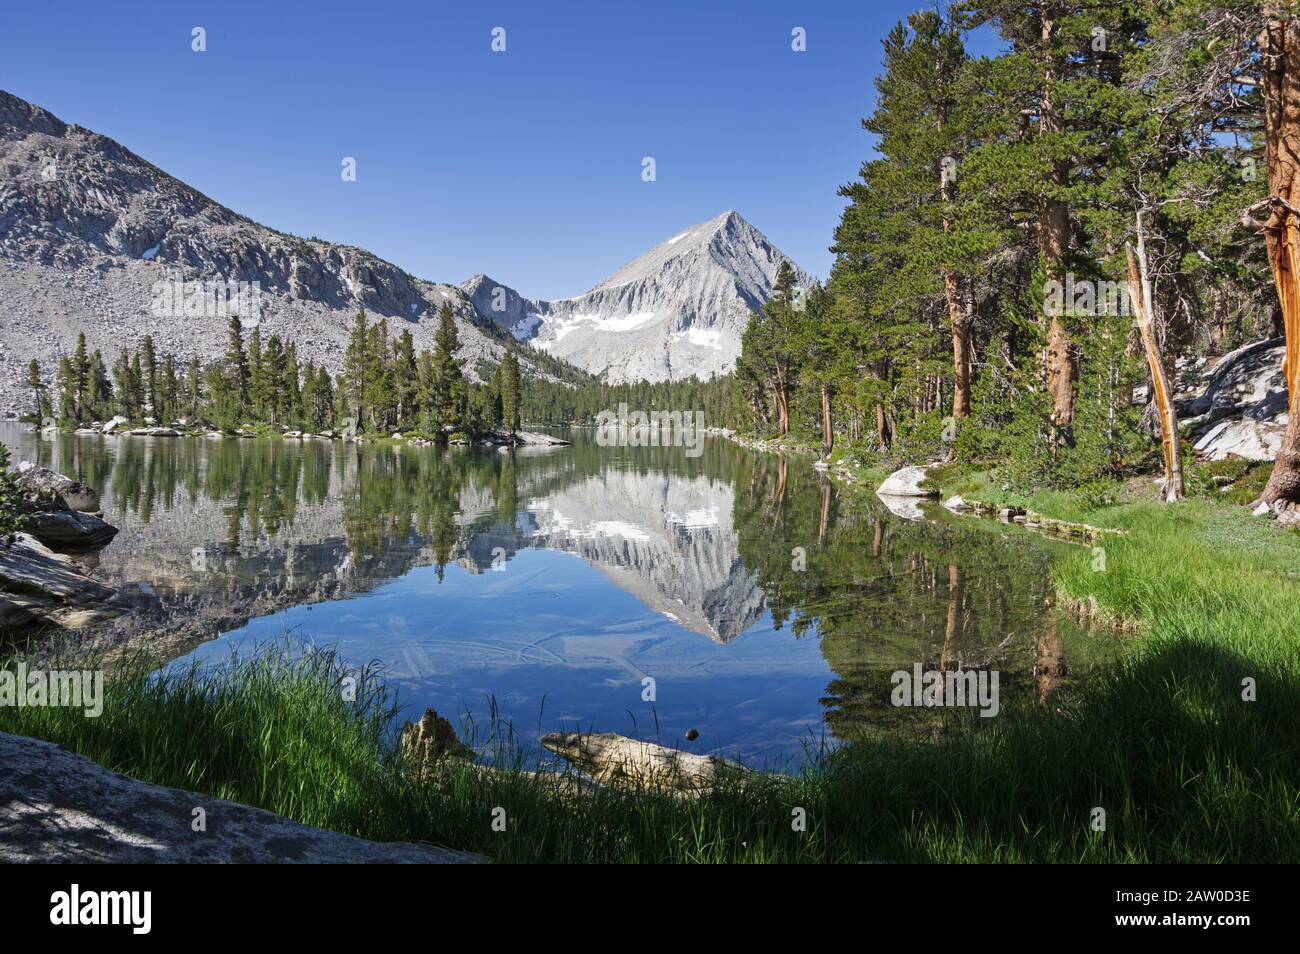 Arrow Peak in Kings Canyon National Park reflected in Bench Lake Stock Photo